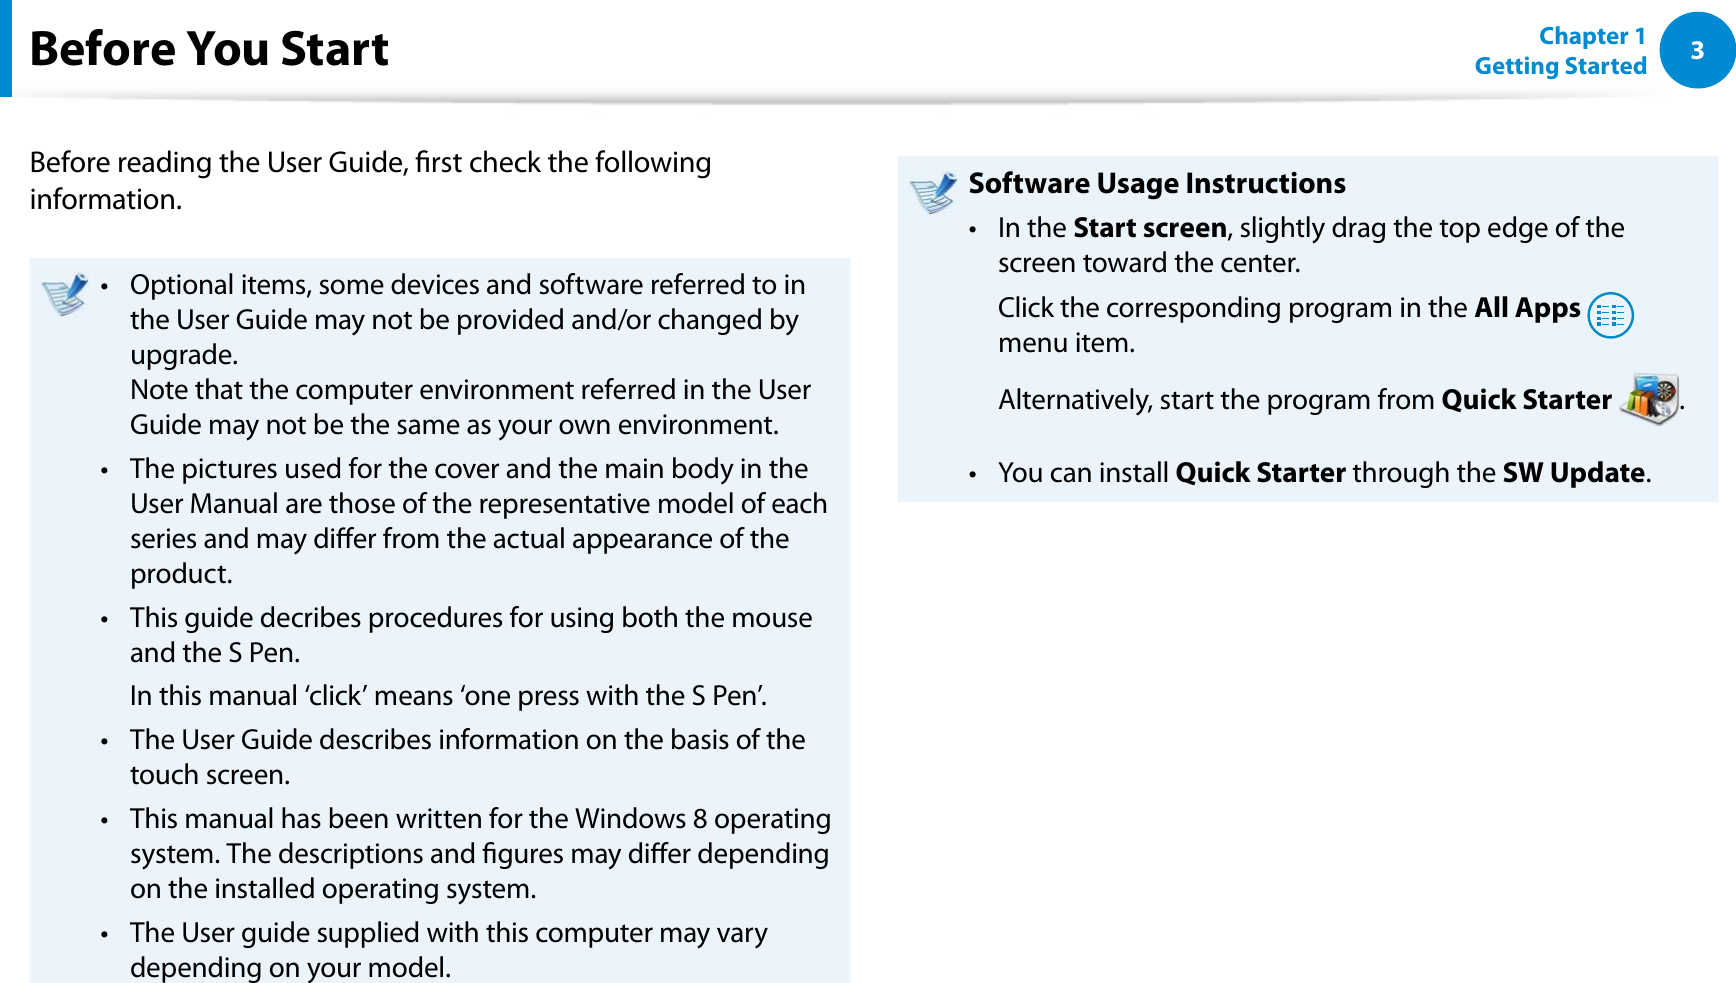 3Chapter 1 Getting StartedBefore You StartBefore reading the User Guide, rst check the following information.Optional items, some devices and software referred to in t the User Guide may not be provided and/or changed by upgrade. Note that the computer environment referred in the User Guide may not be the same as your own environment. The pictures used for the cover and the main body in the t User Manual are those of the representative model of each series and may dier from the actual appearance of the product.This guide decribes procedures for using both the mouse t and the S Pen.  In this manual ‘click’ means ‘one press with the S Pen’.The User Guide describes information on the basis of the t touch screen.This manual has been written for the Windows 8 operating t system. The descriptions and gures may dier depending on the installed operating system.The User guide supplied with this computer may vary t depending on your model.Software Usage InstructionsIn the t Start screen, slightly drag the top edge of the screen toward the center.  Click the corresponding program in the All Apps  menu item.  Alternatively, start the program from Quick Starter .You can install t Quick Starter through the SW Update.